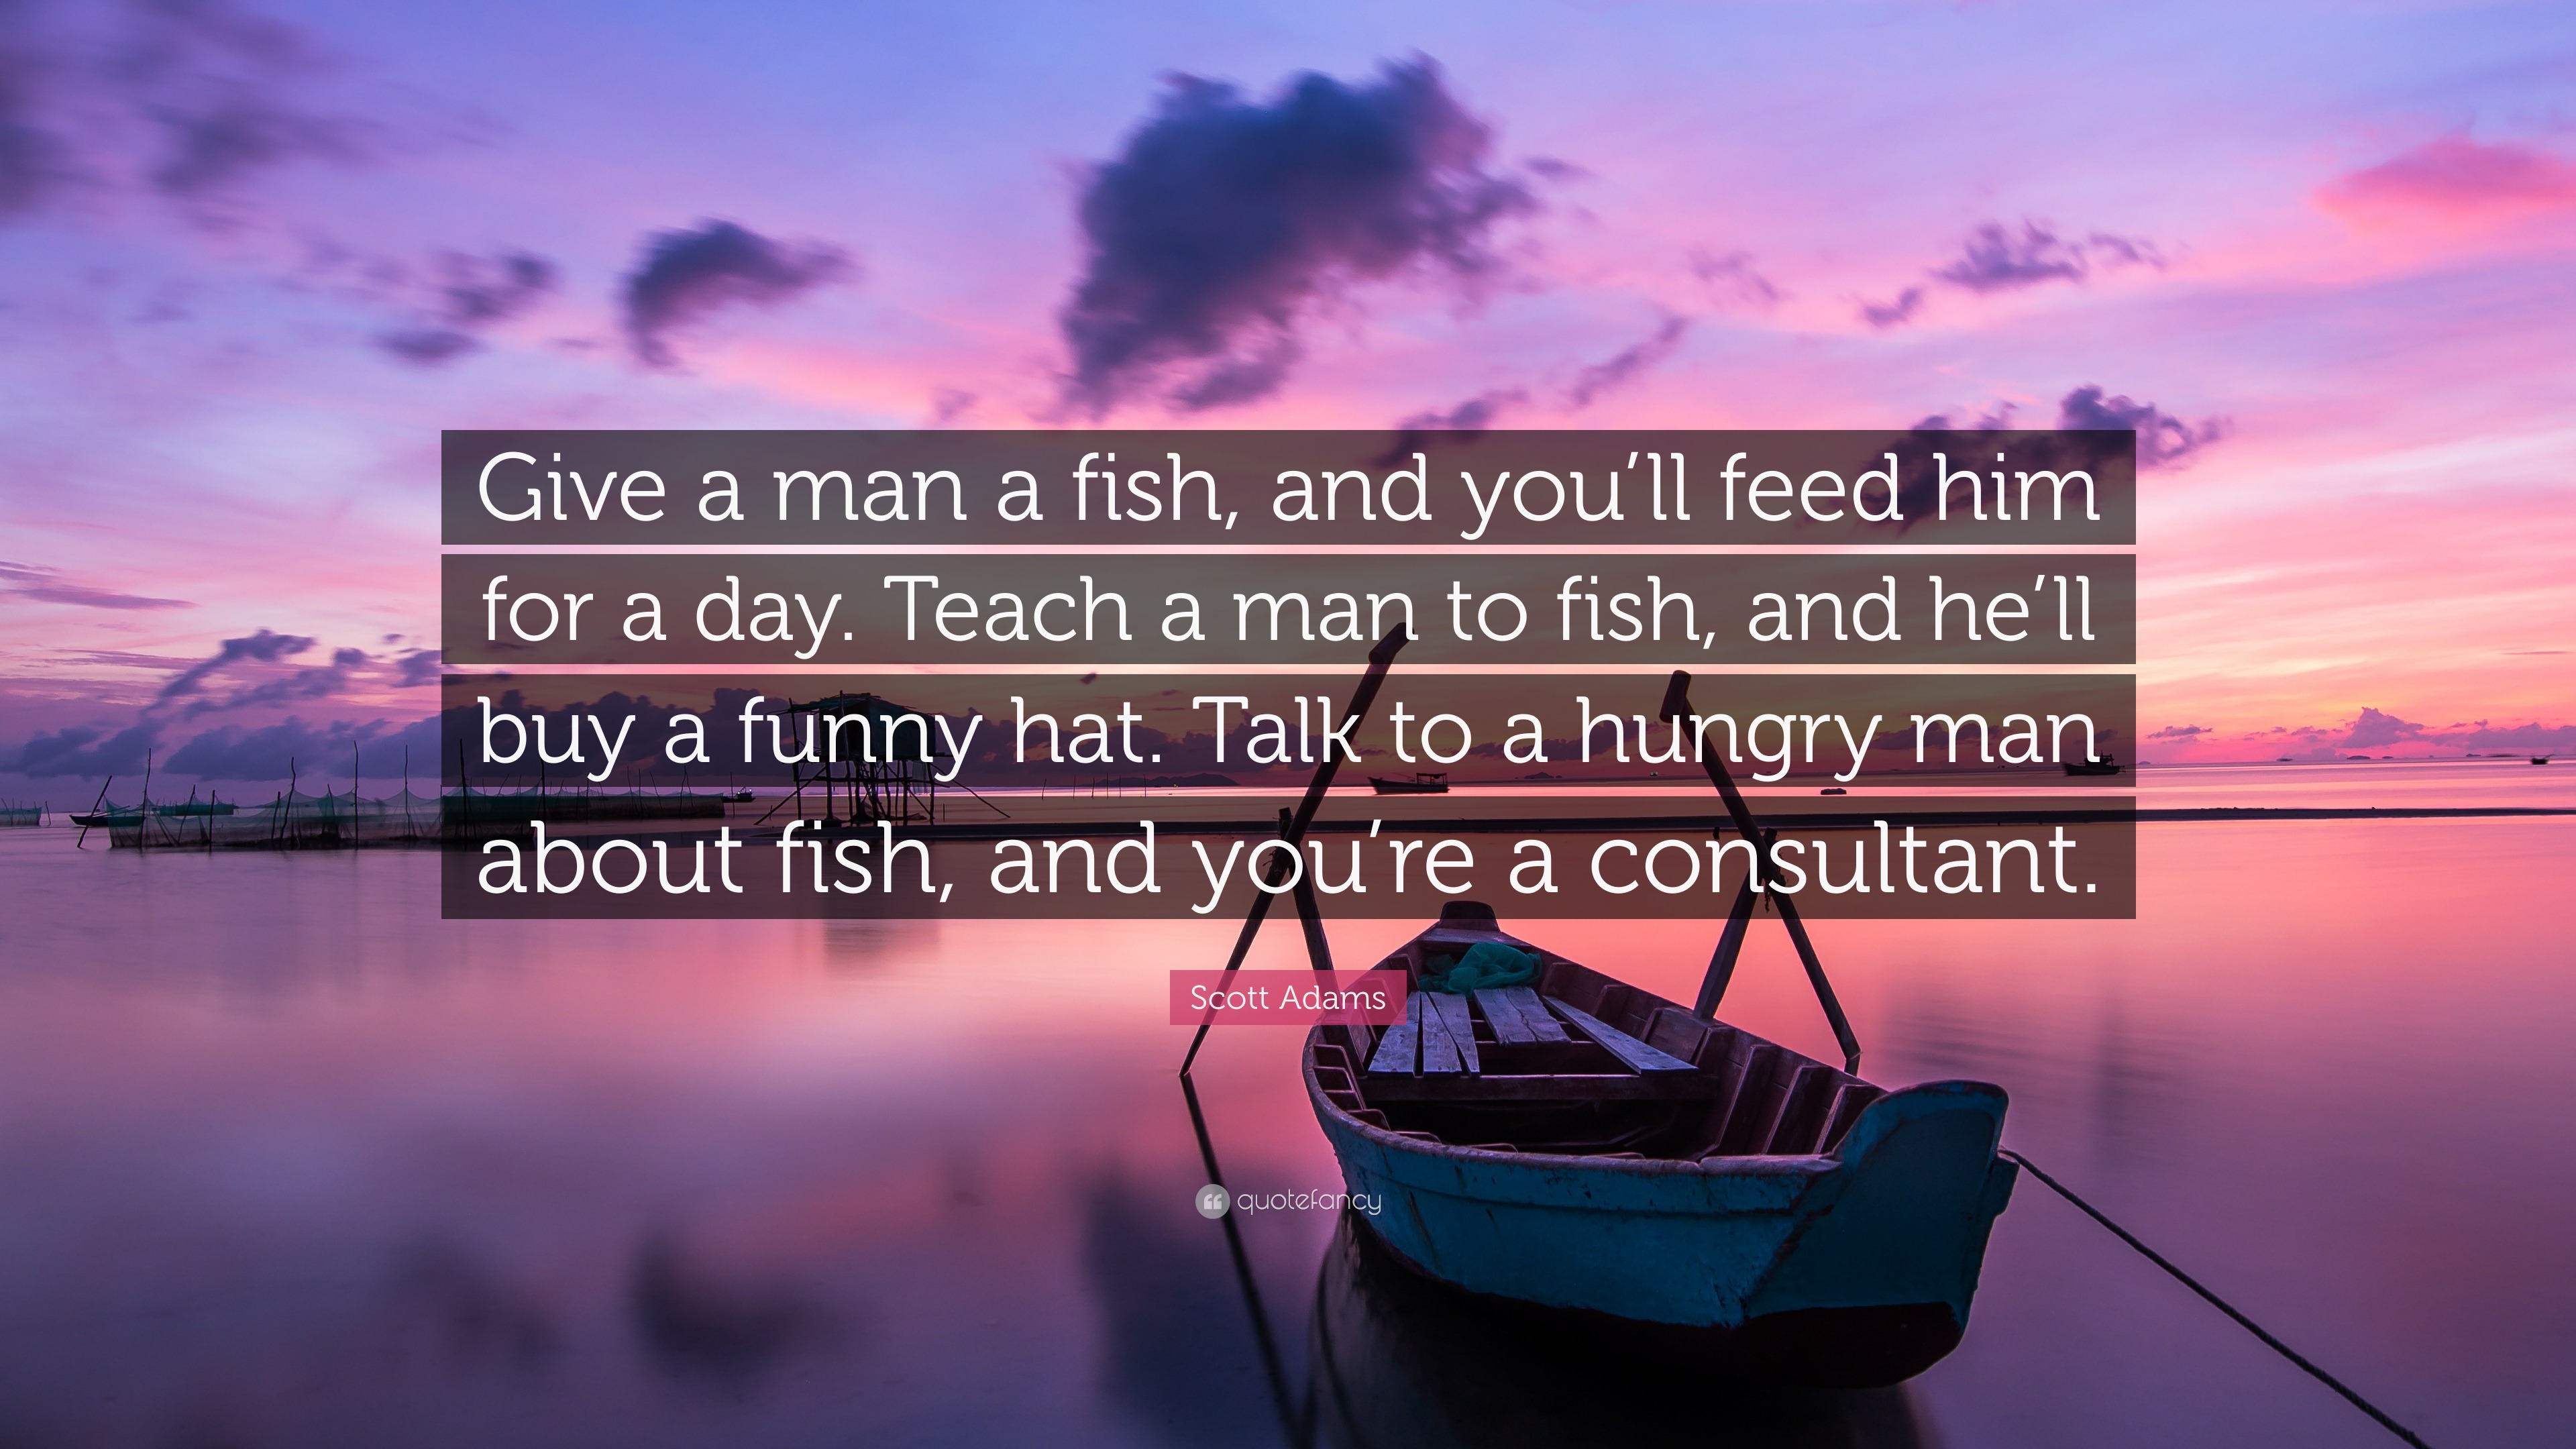 Scott Adams Quote Give A Man A Fish And You Ll Feed Him For A Day Teach A Man To Fish And He Ll Buy A Funny Hat Talk To A Hungry Man A